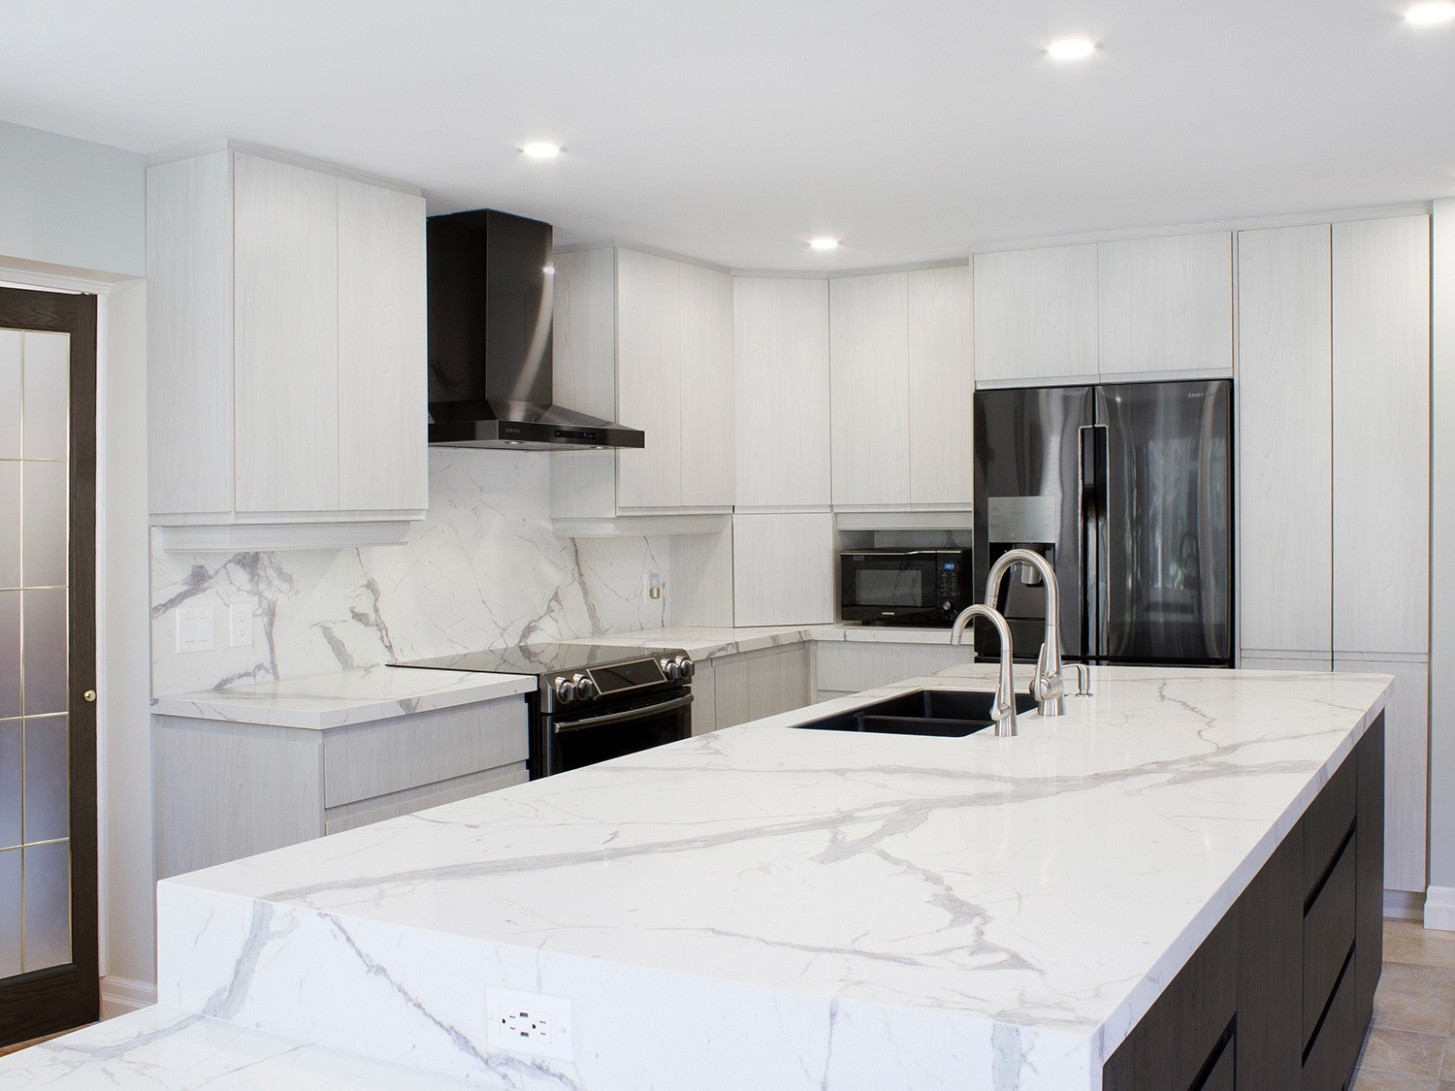 Kitchen Color Schemes for White Cabinets  Granite Transformations  - what color granite countertops go with white cabinets?